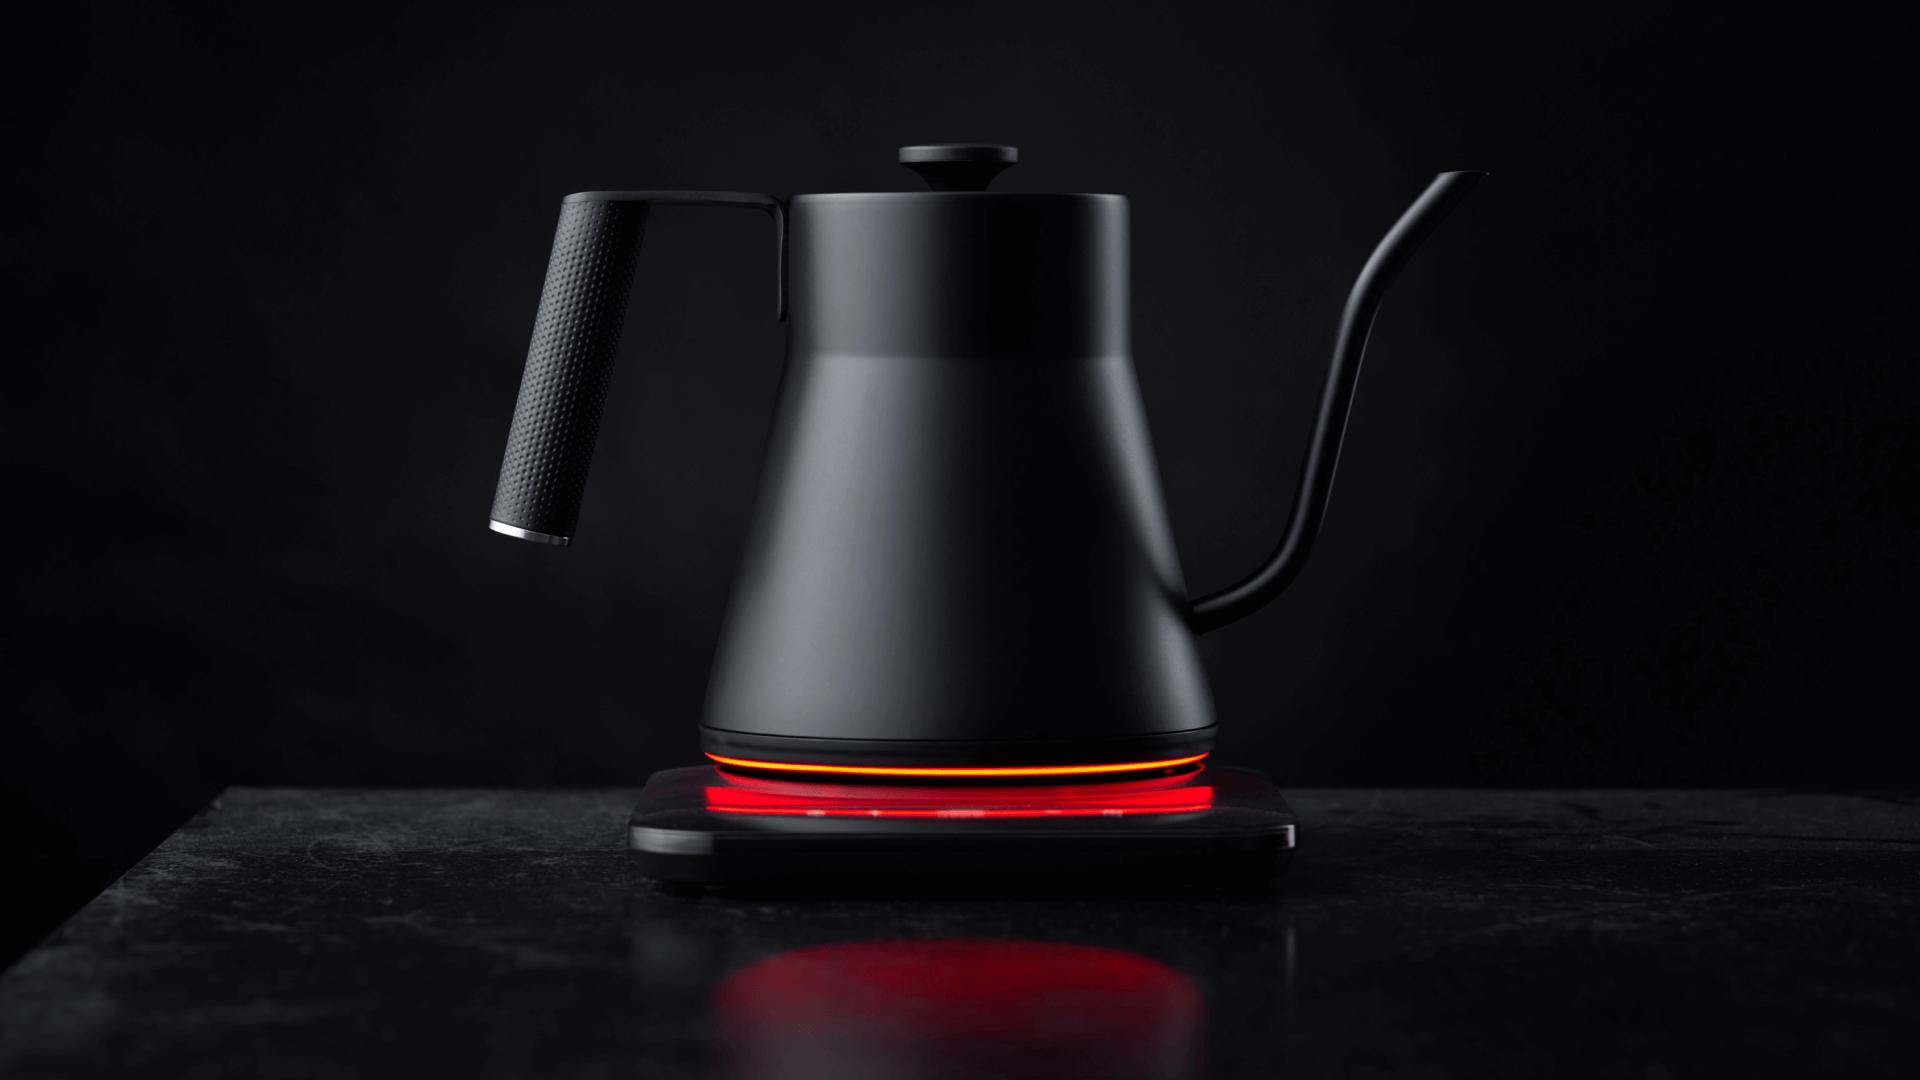  SAKI Baristan Electric Gooseneck Kettle with Precise  Temperature Control, Pour Over Coffee Kettle & Tea Kettle, Stainless Steel,  1200W Quick Heating, 1 Liter, Matte Black: Home & Kitchen